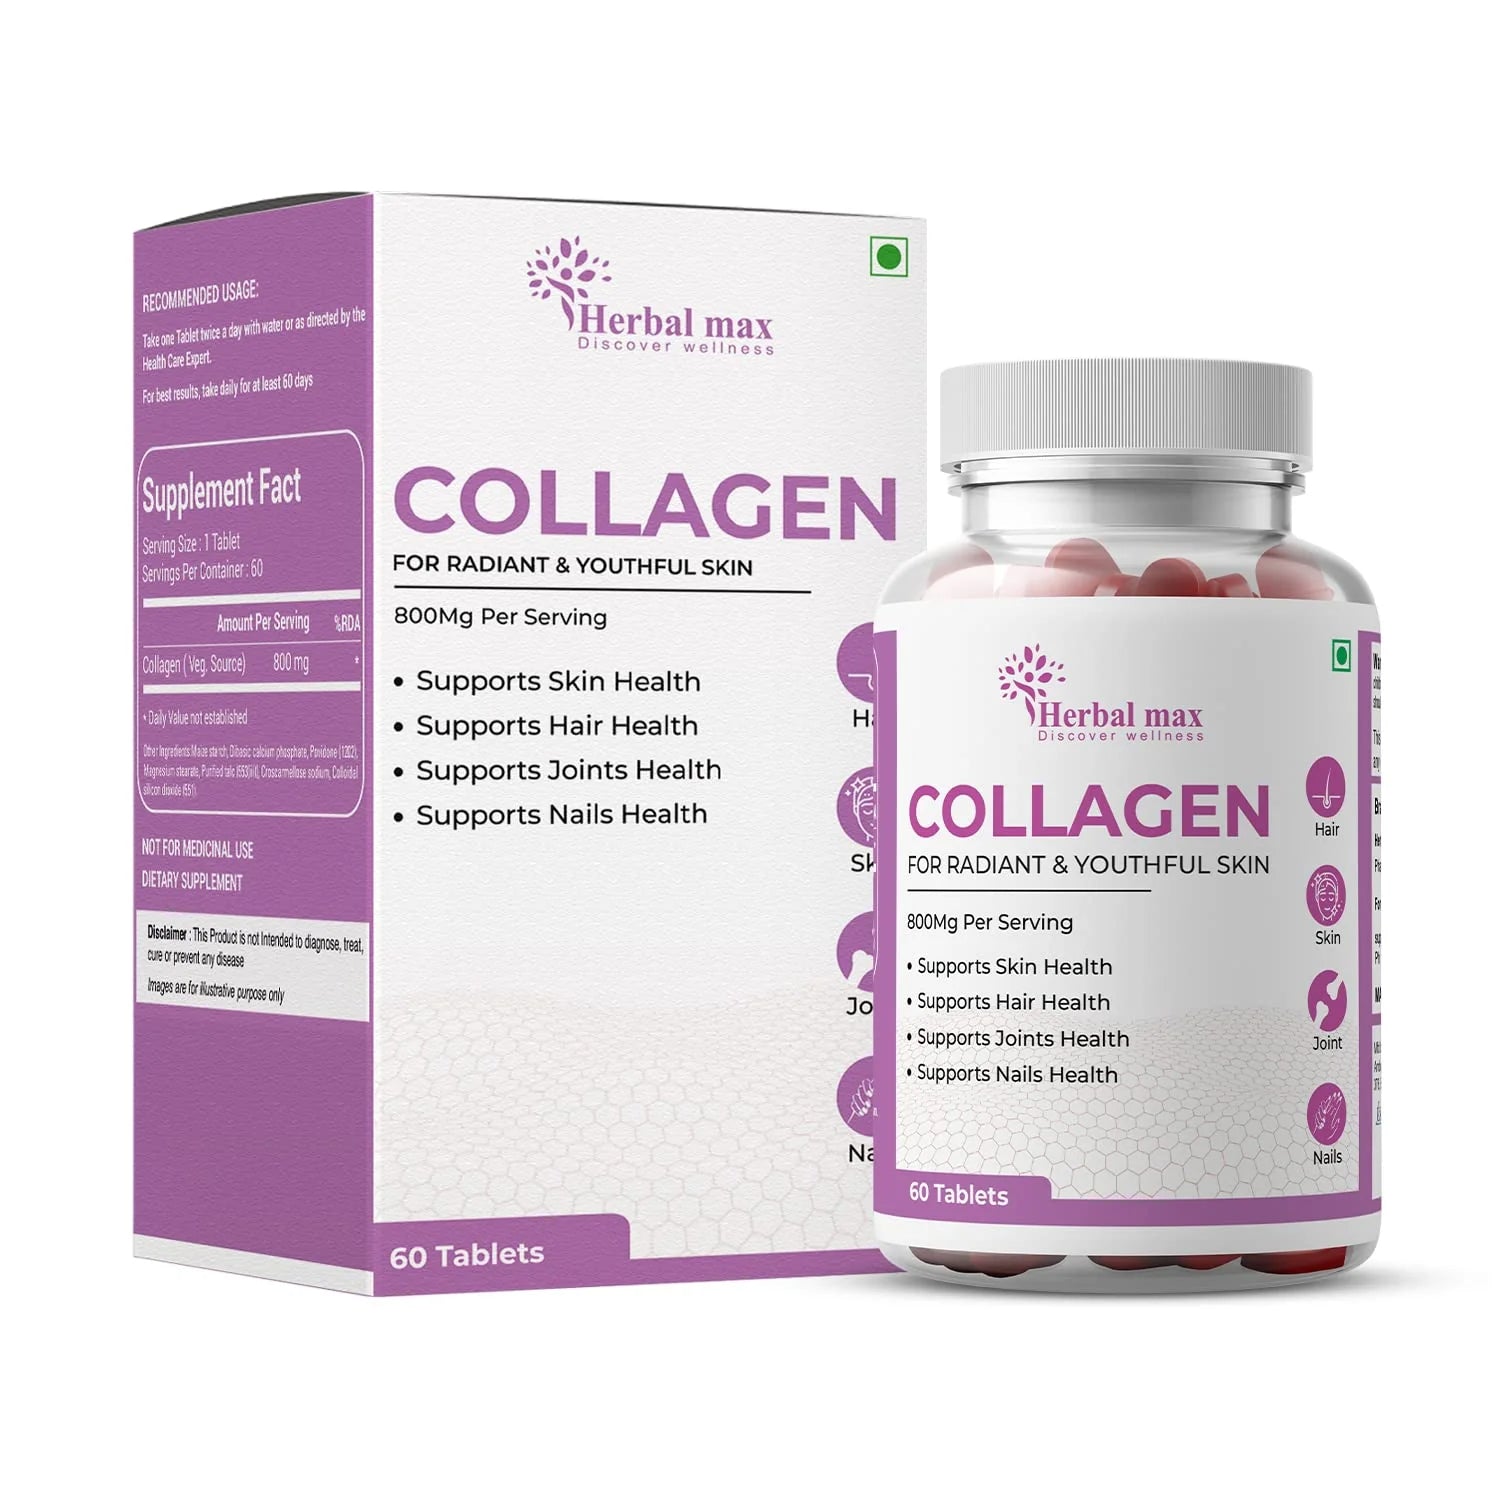 Beauty Collagen and Herbal Max Collagen Combo